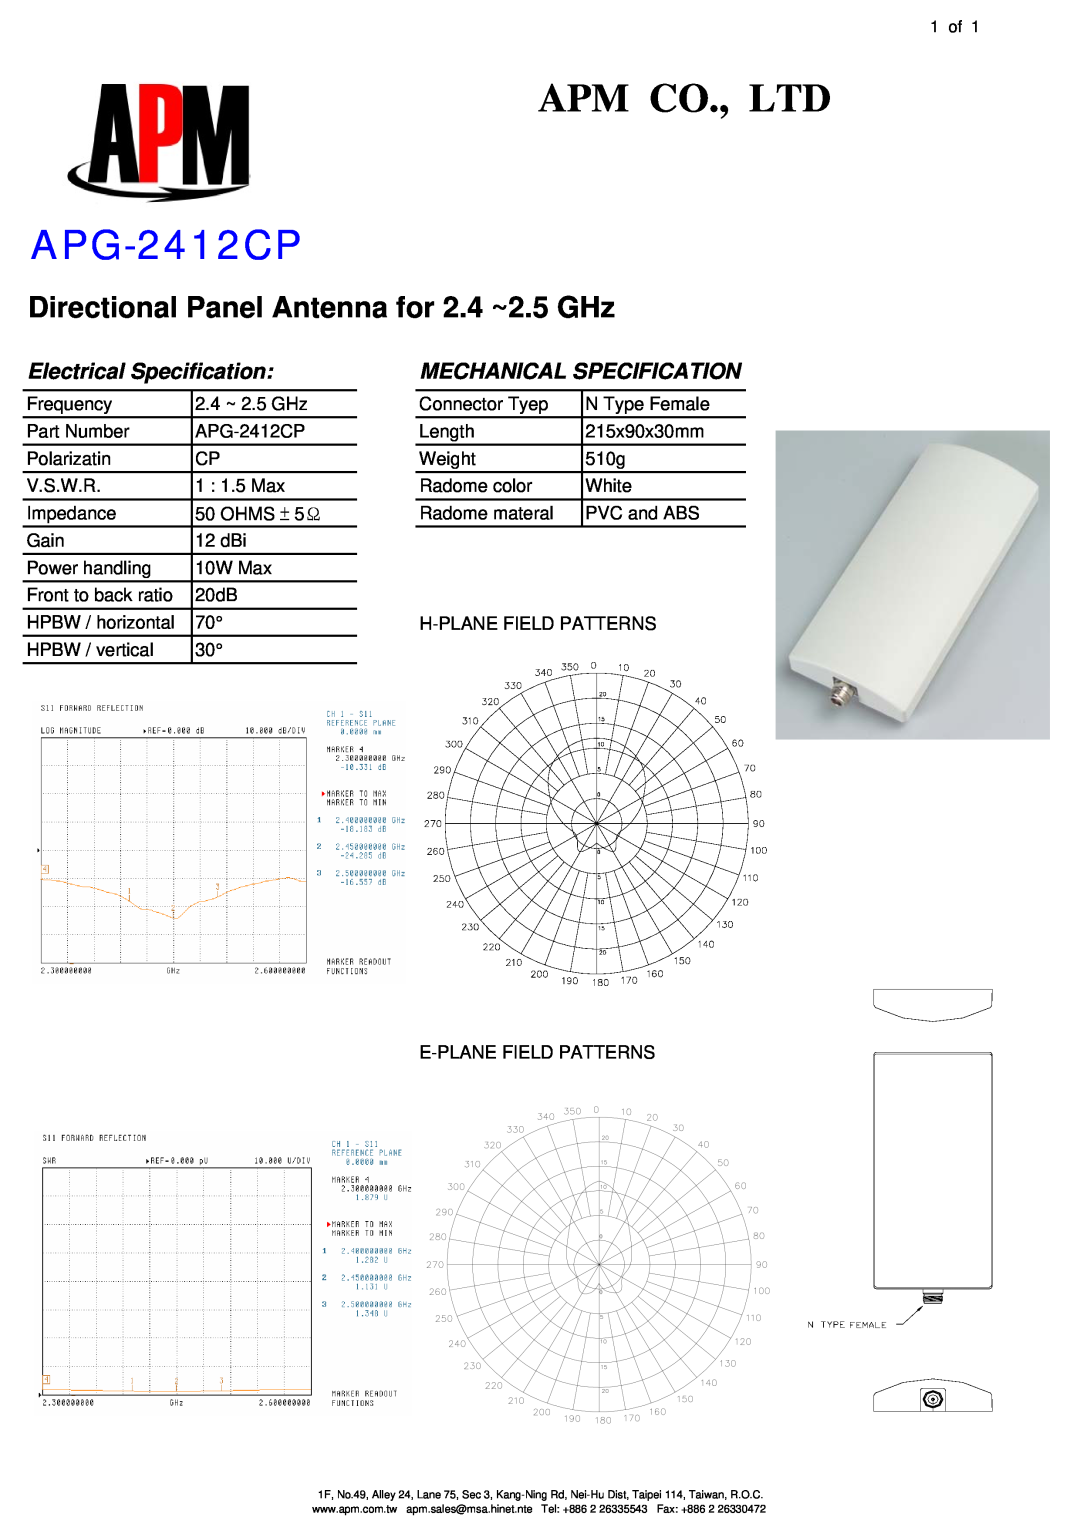 APM APG-2412CP manual Directional Panel Antenna for 2.4 ~2.5 GHz, Electrical Specification, Mechanical Specification 